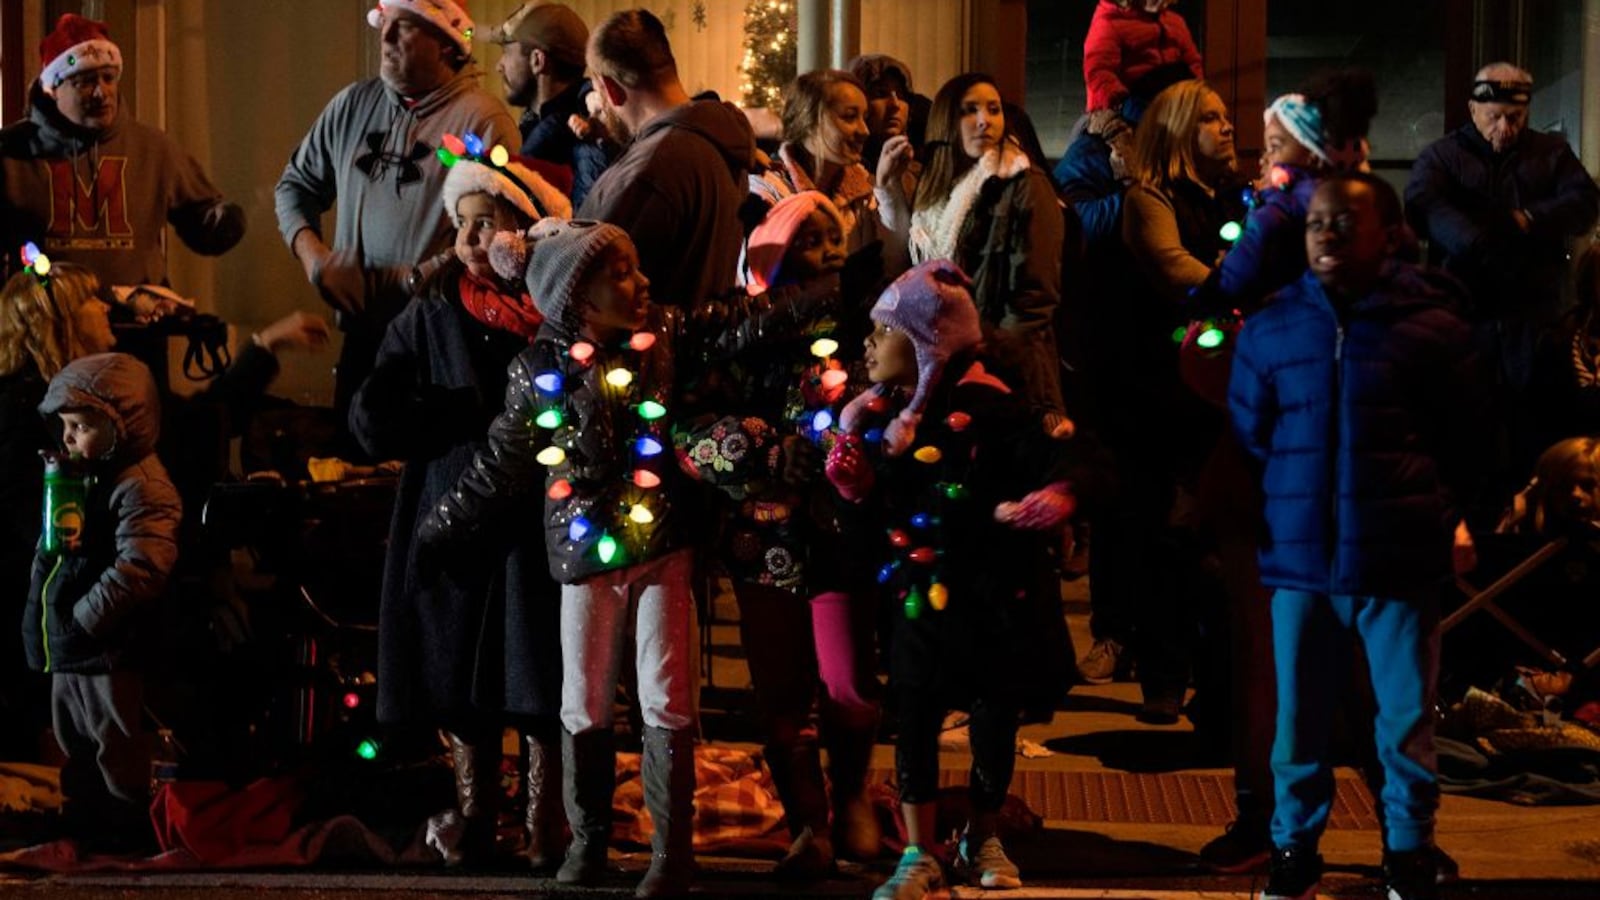 The Centreville Christmas Parade in Centreville, Maryland in 2017. (JIM WATSON/AFP via Getty Images)